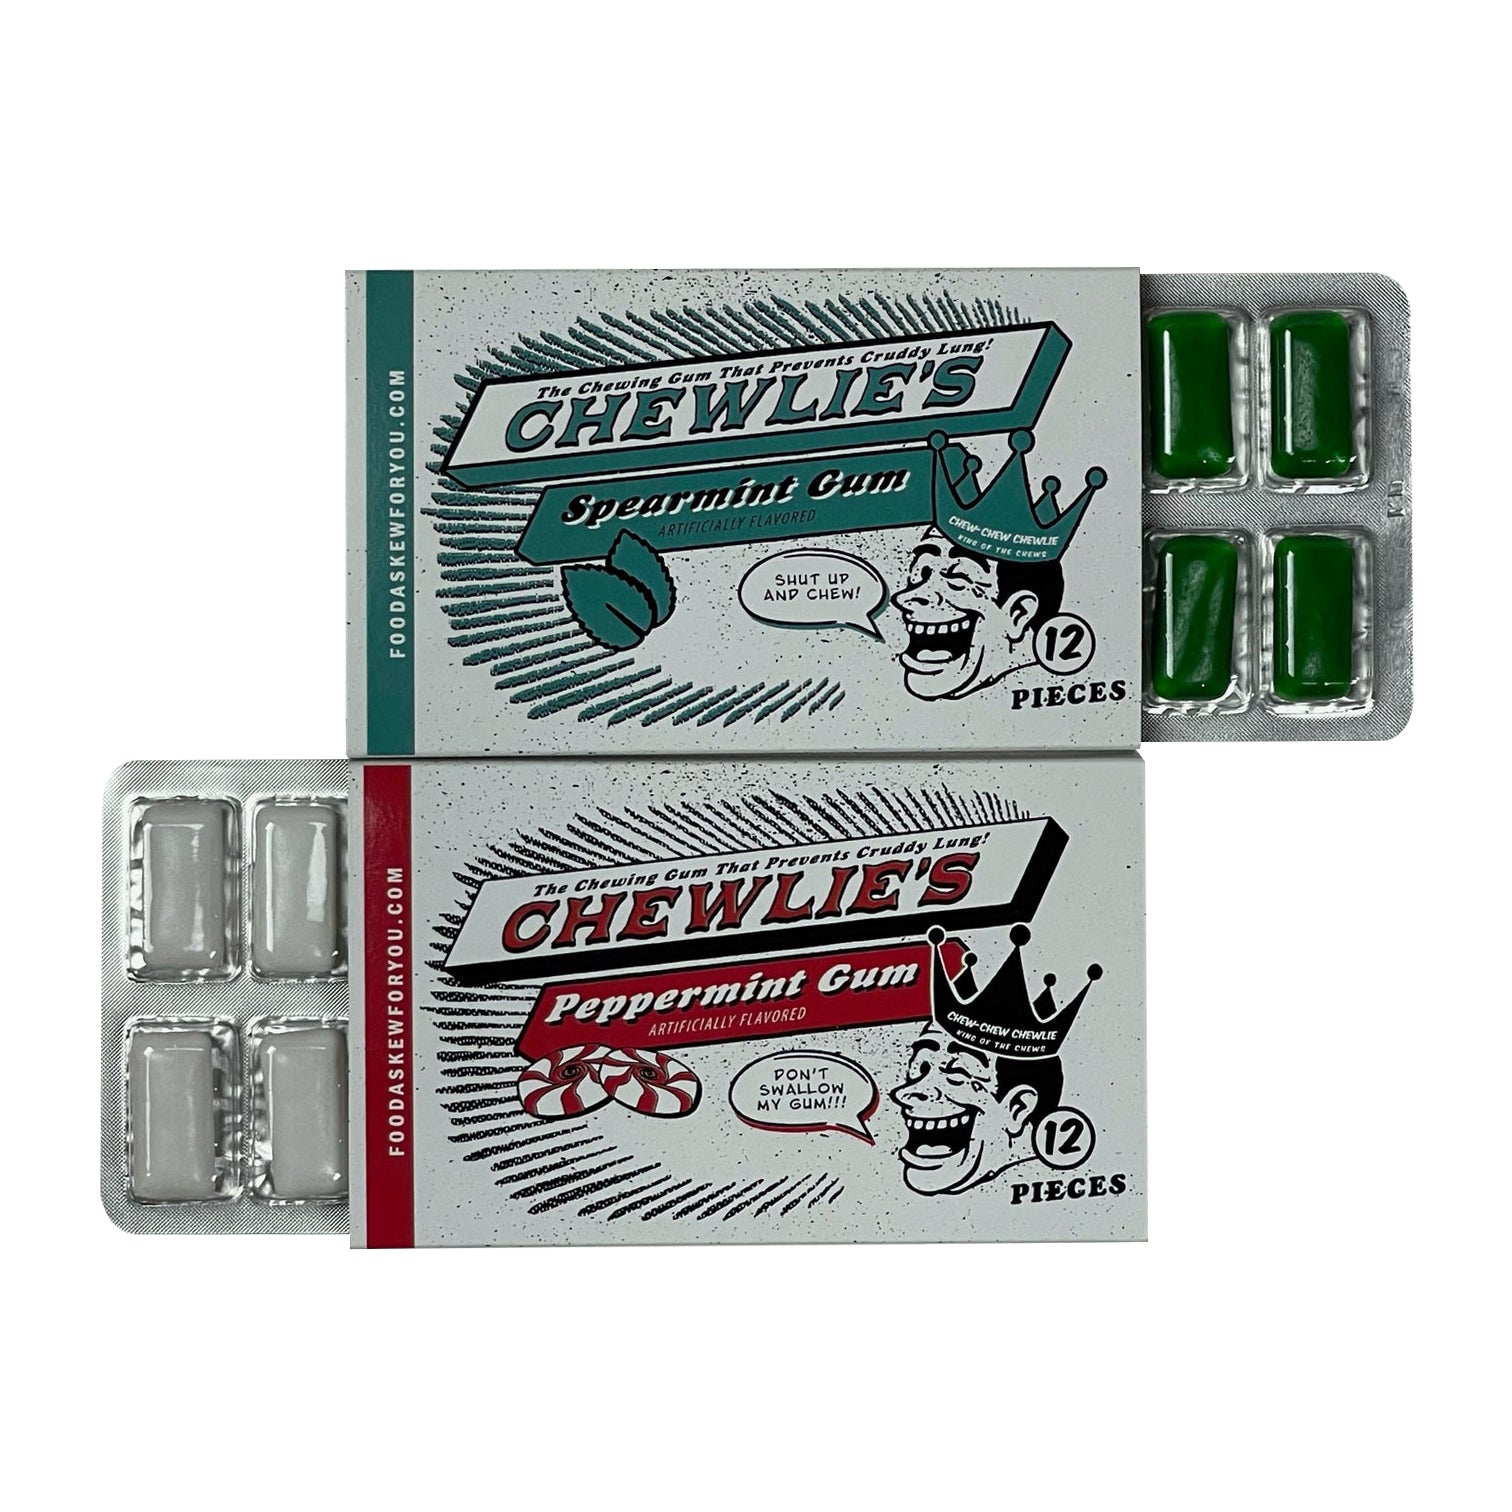 Chewlie's Peppermint and Spearmint 2 Pack of Gum